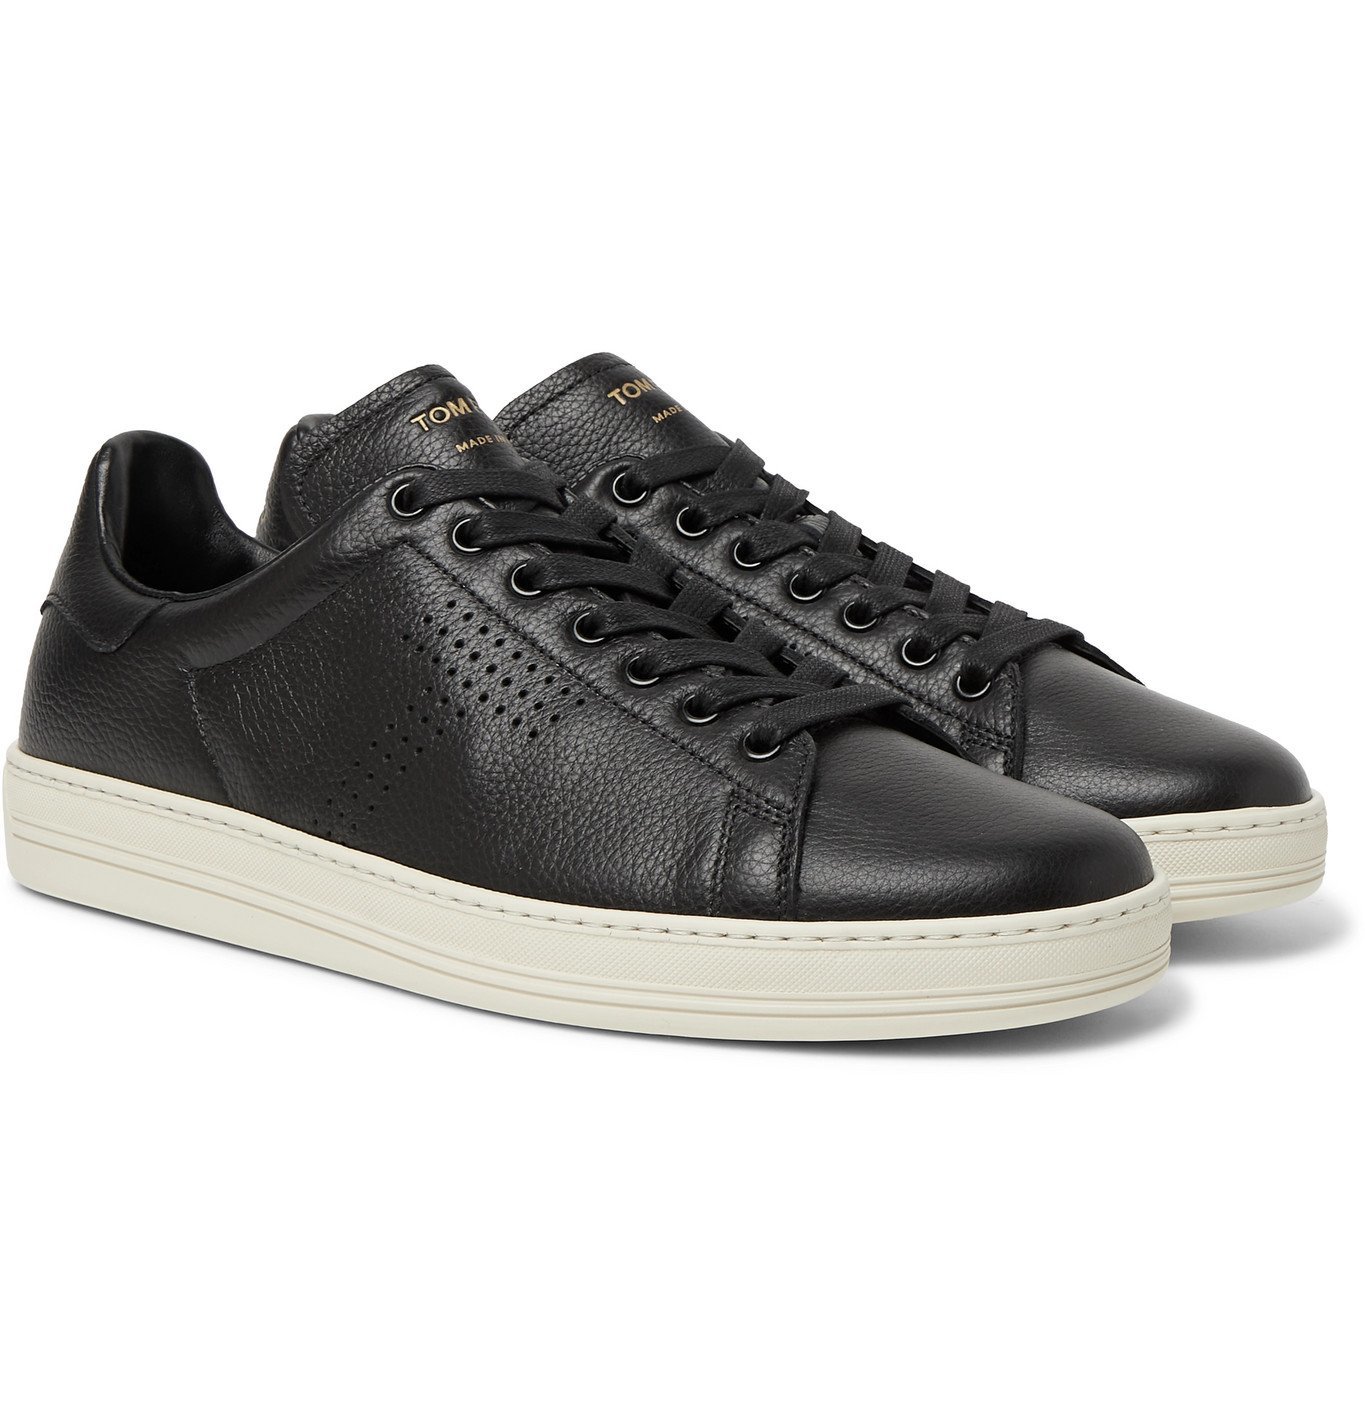 TOM FORD - Warwick Perforated Full-Grain Leather Sneakers - Black TOM FORD